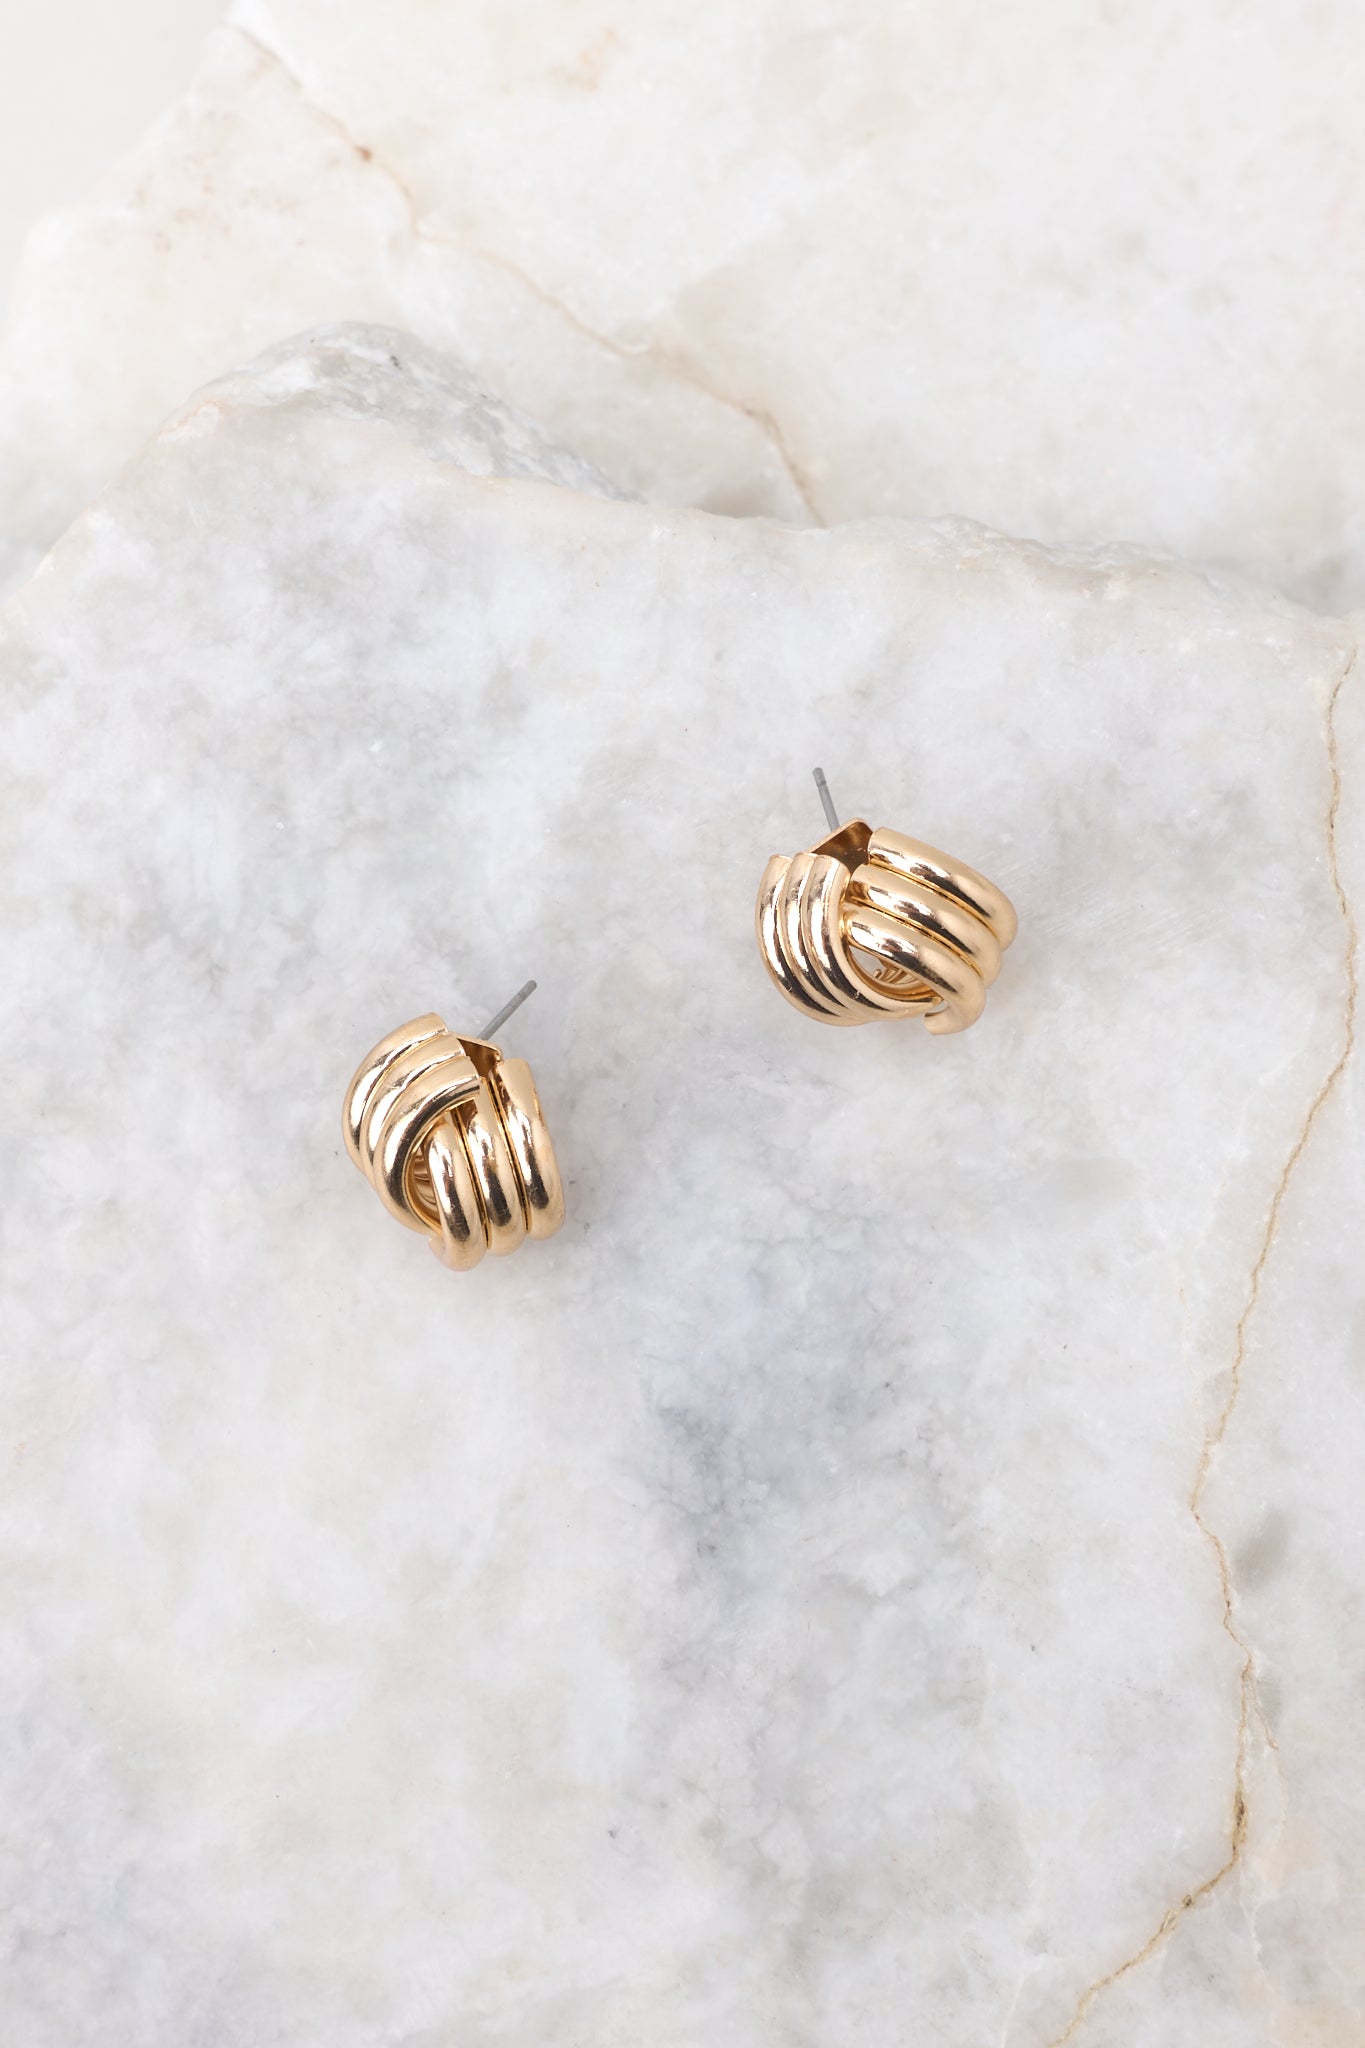 Full view of these earrings that feature a gold finish, a twisted design, and a secure post backing.